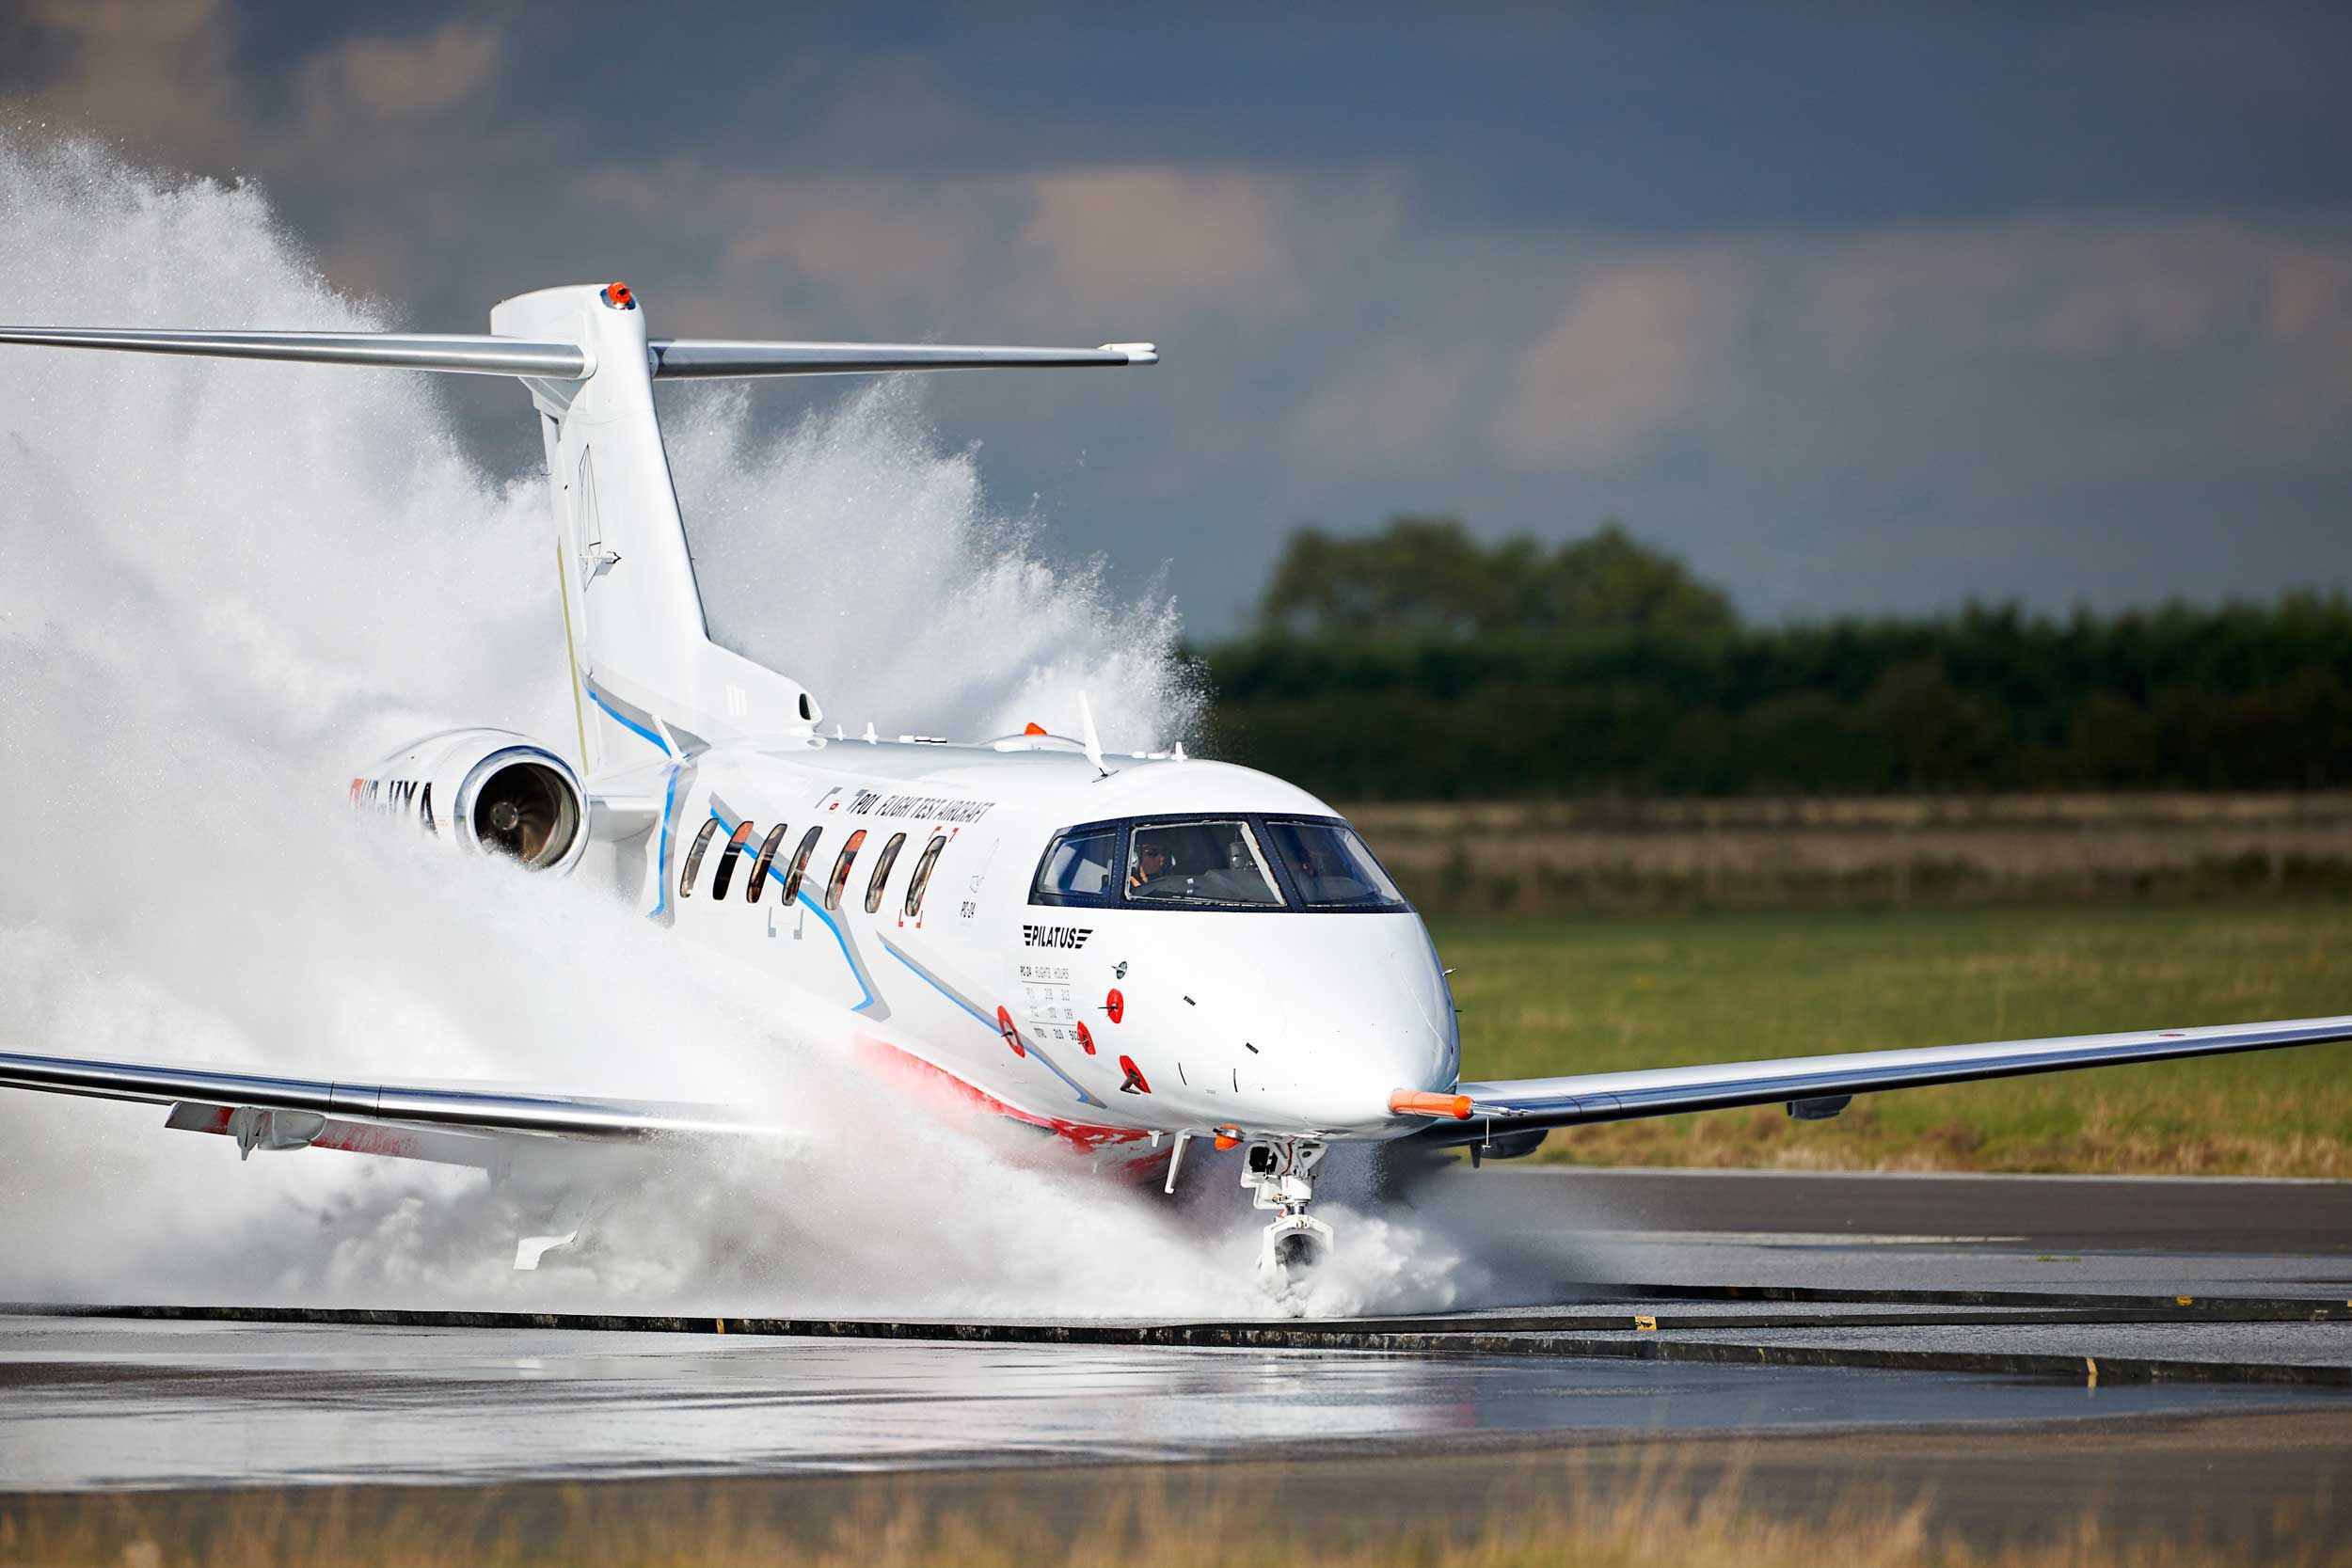 A Pilatus-PC-24 landing on a runway completely flooded with water.